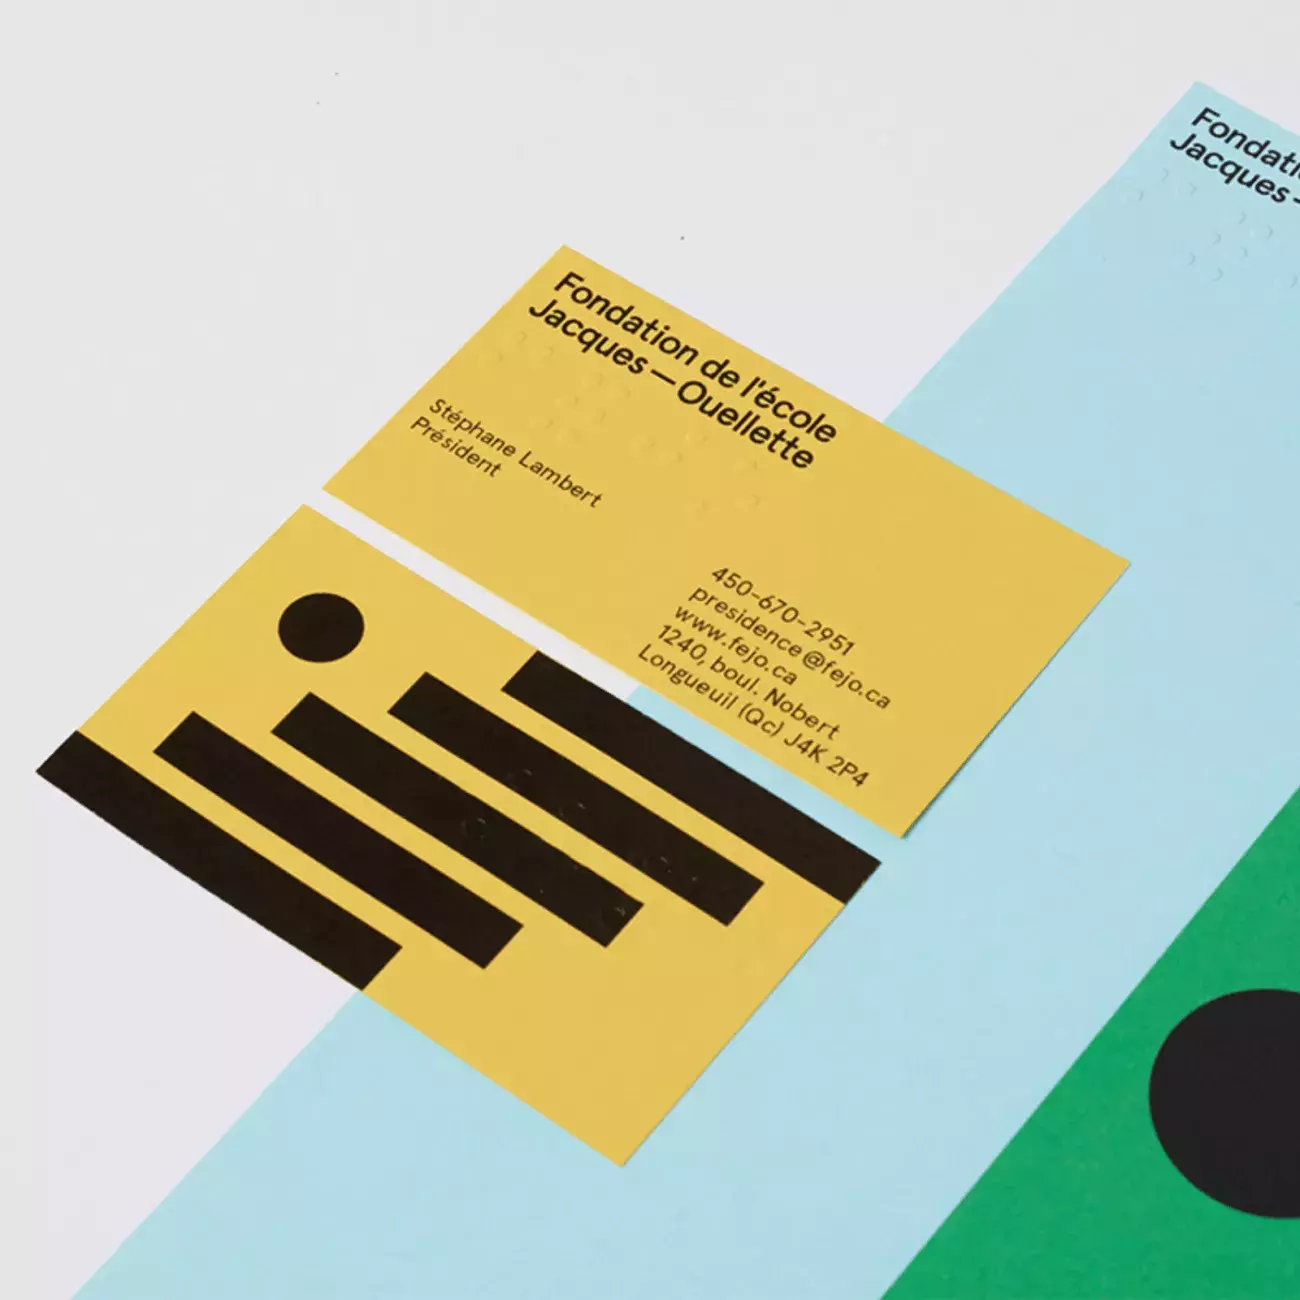 Branding & visual identity for a school for blind and visually impaired students